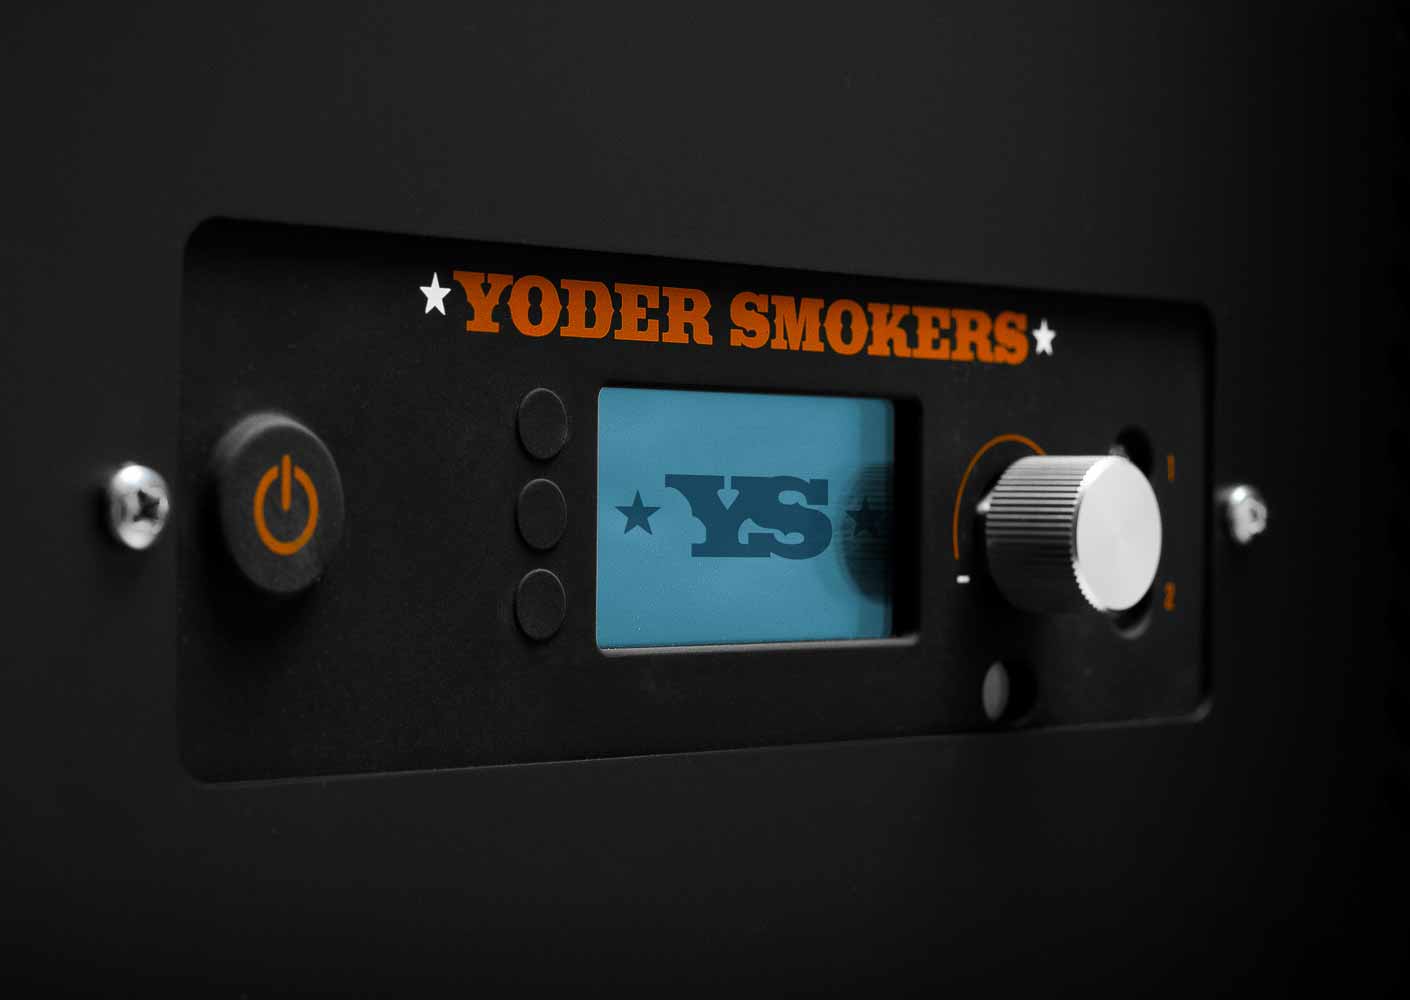 Close up of the Yoder Smokers YS640s controller.